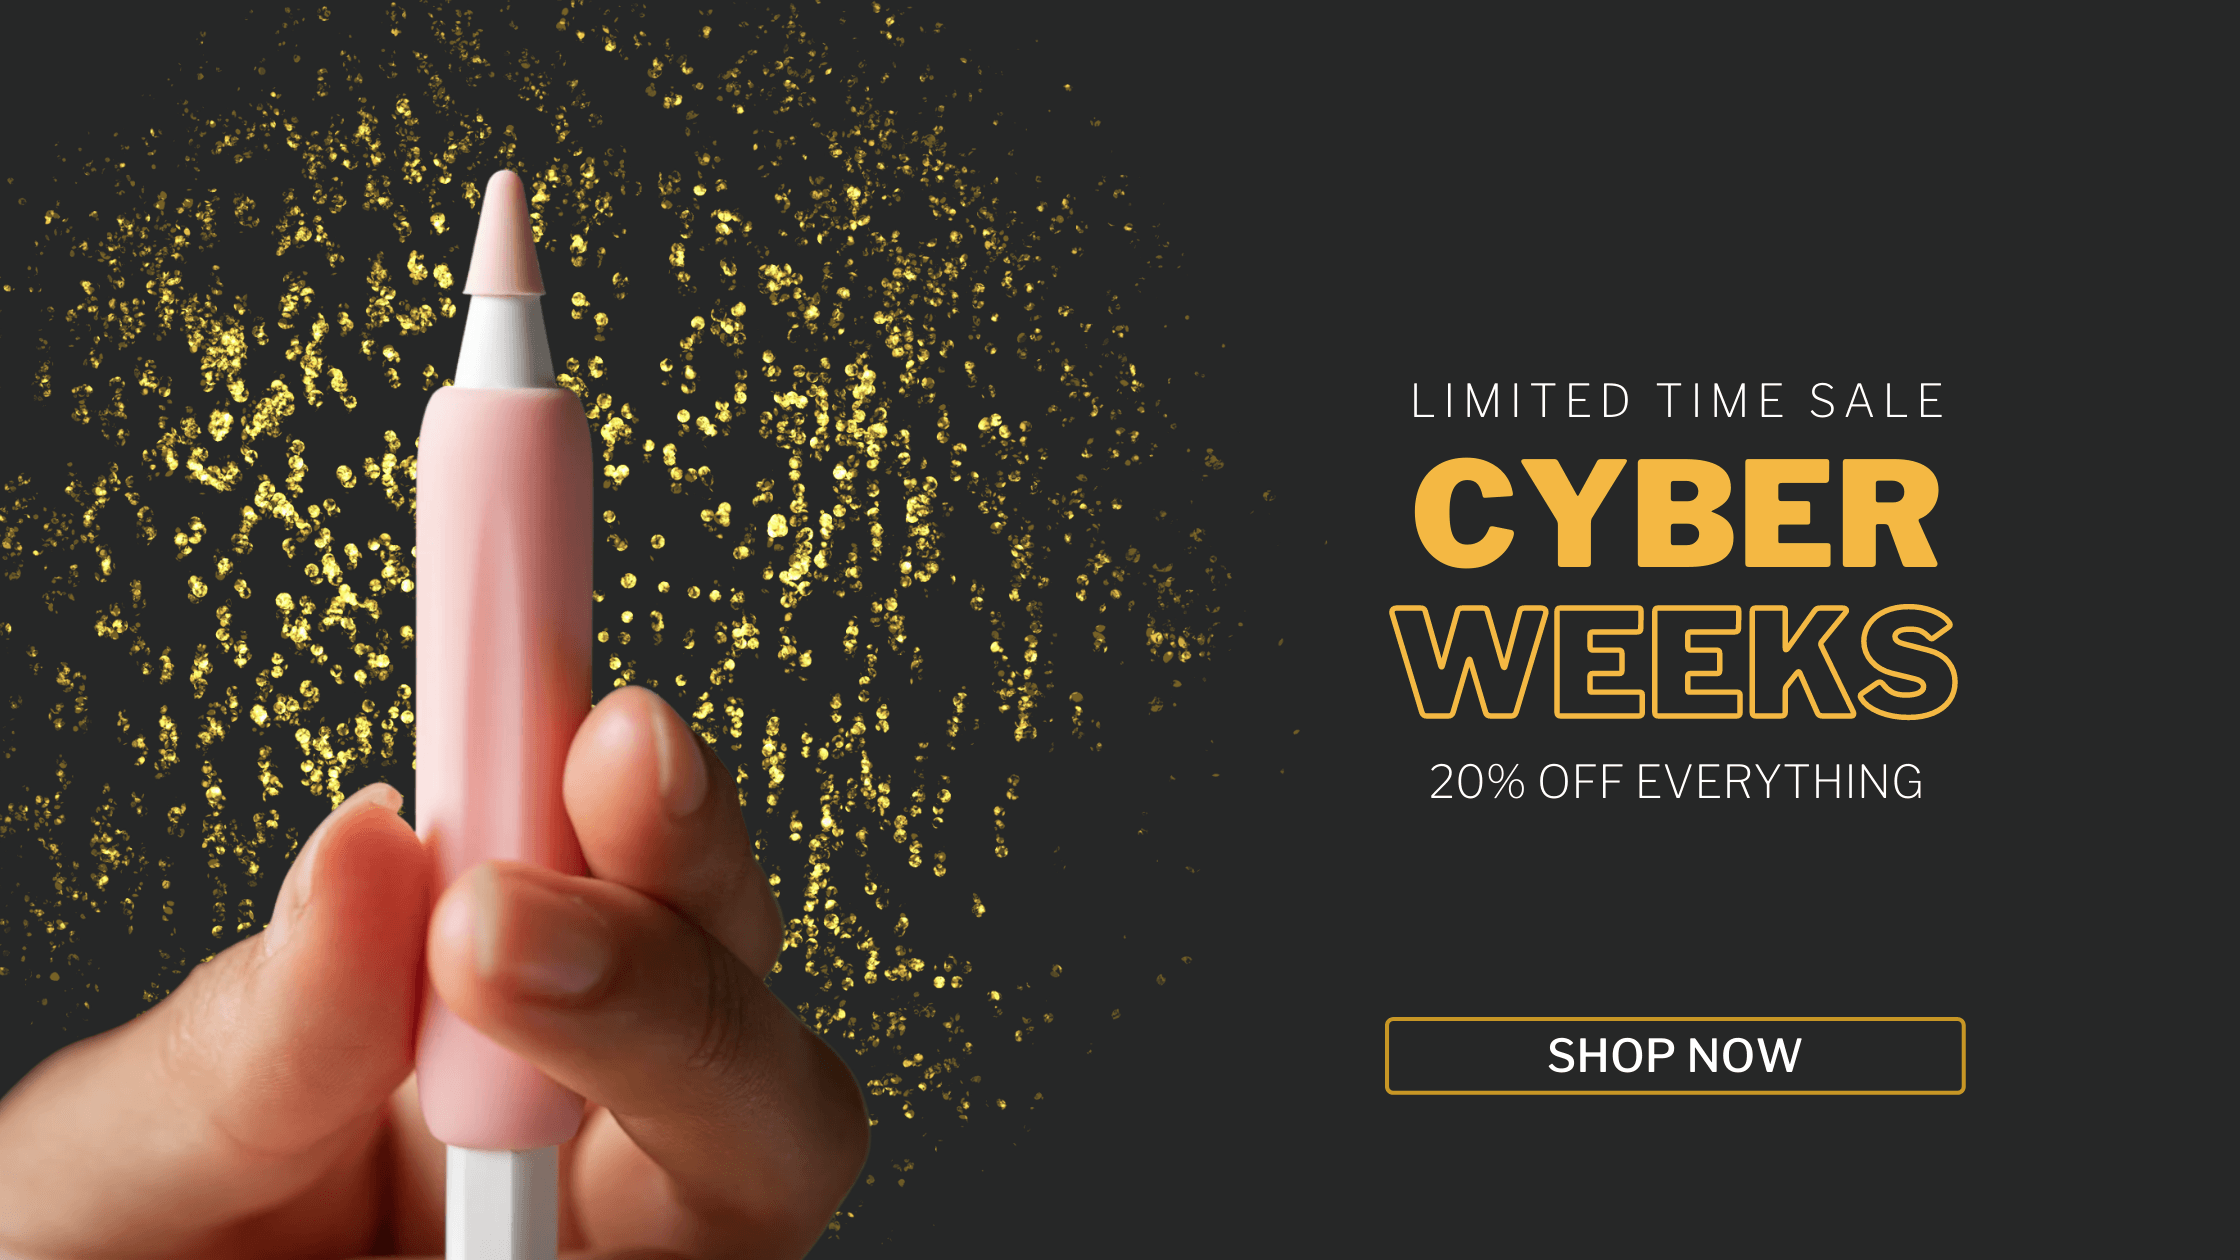 Cyber Weeks Sale - What to expect from PenTips?